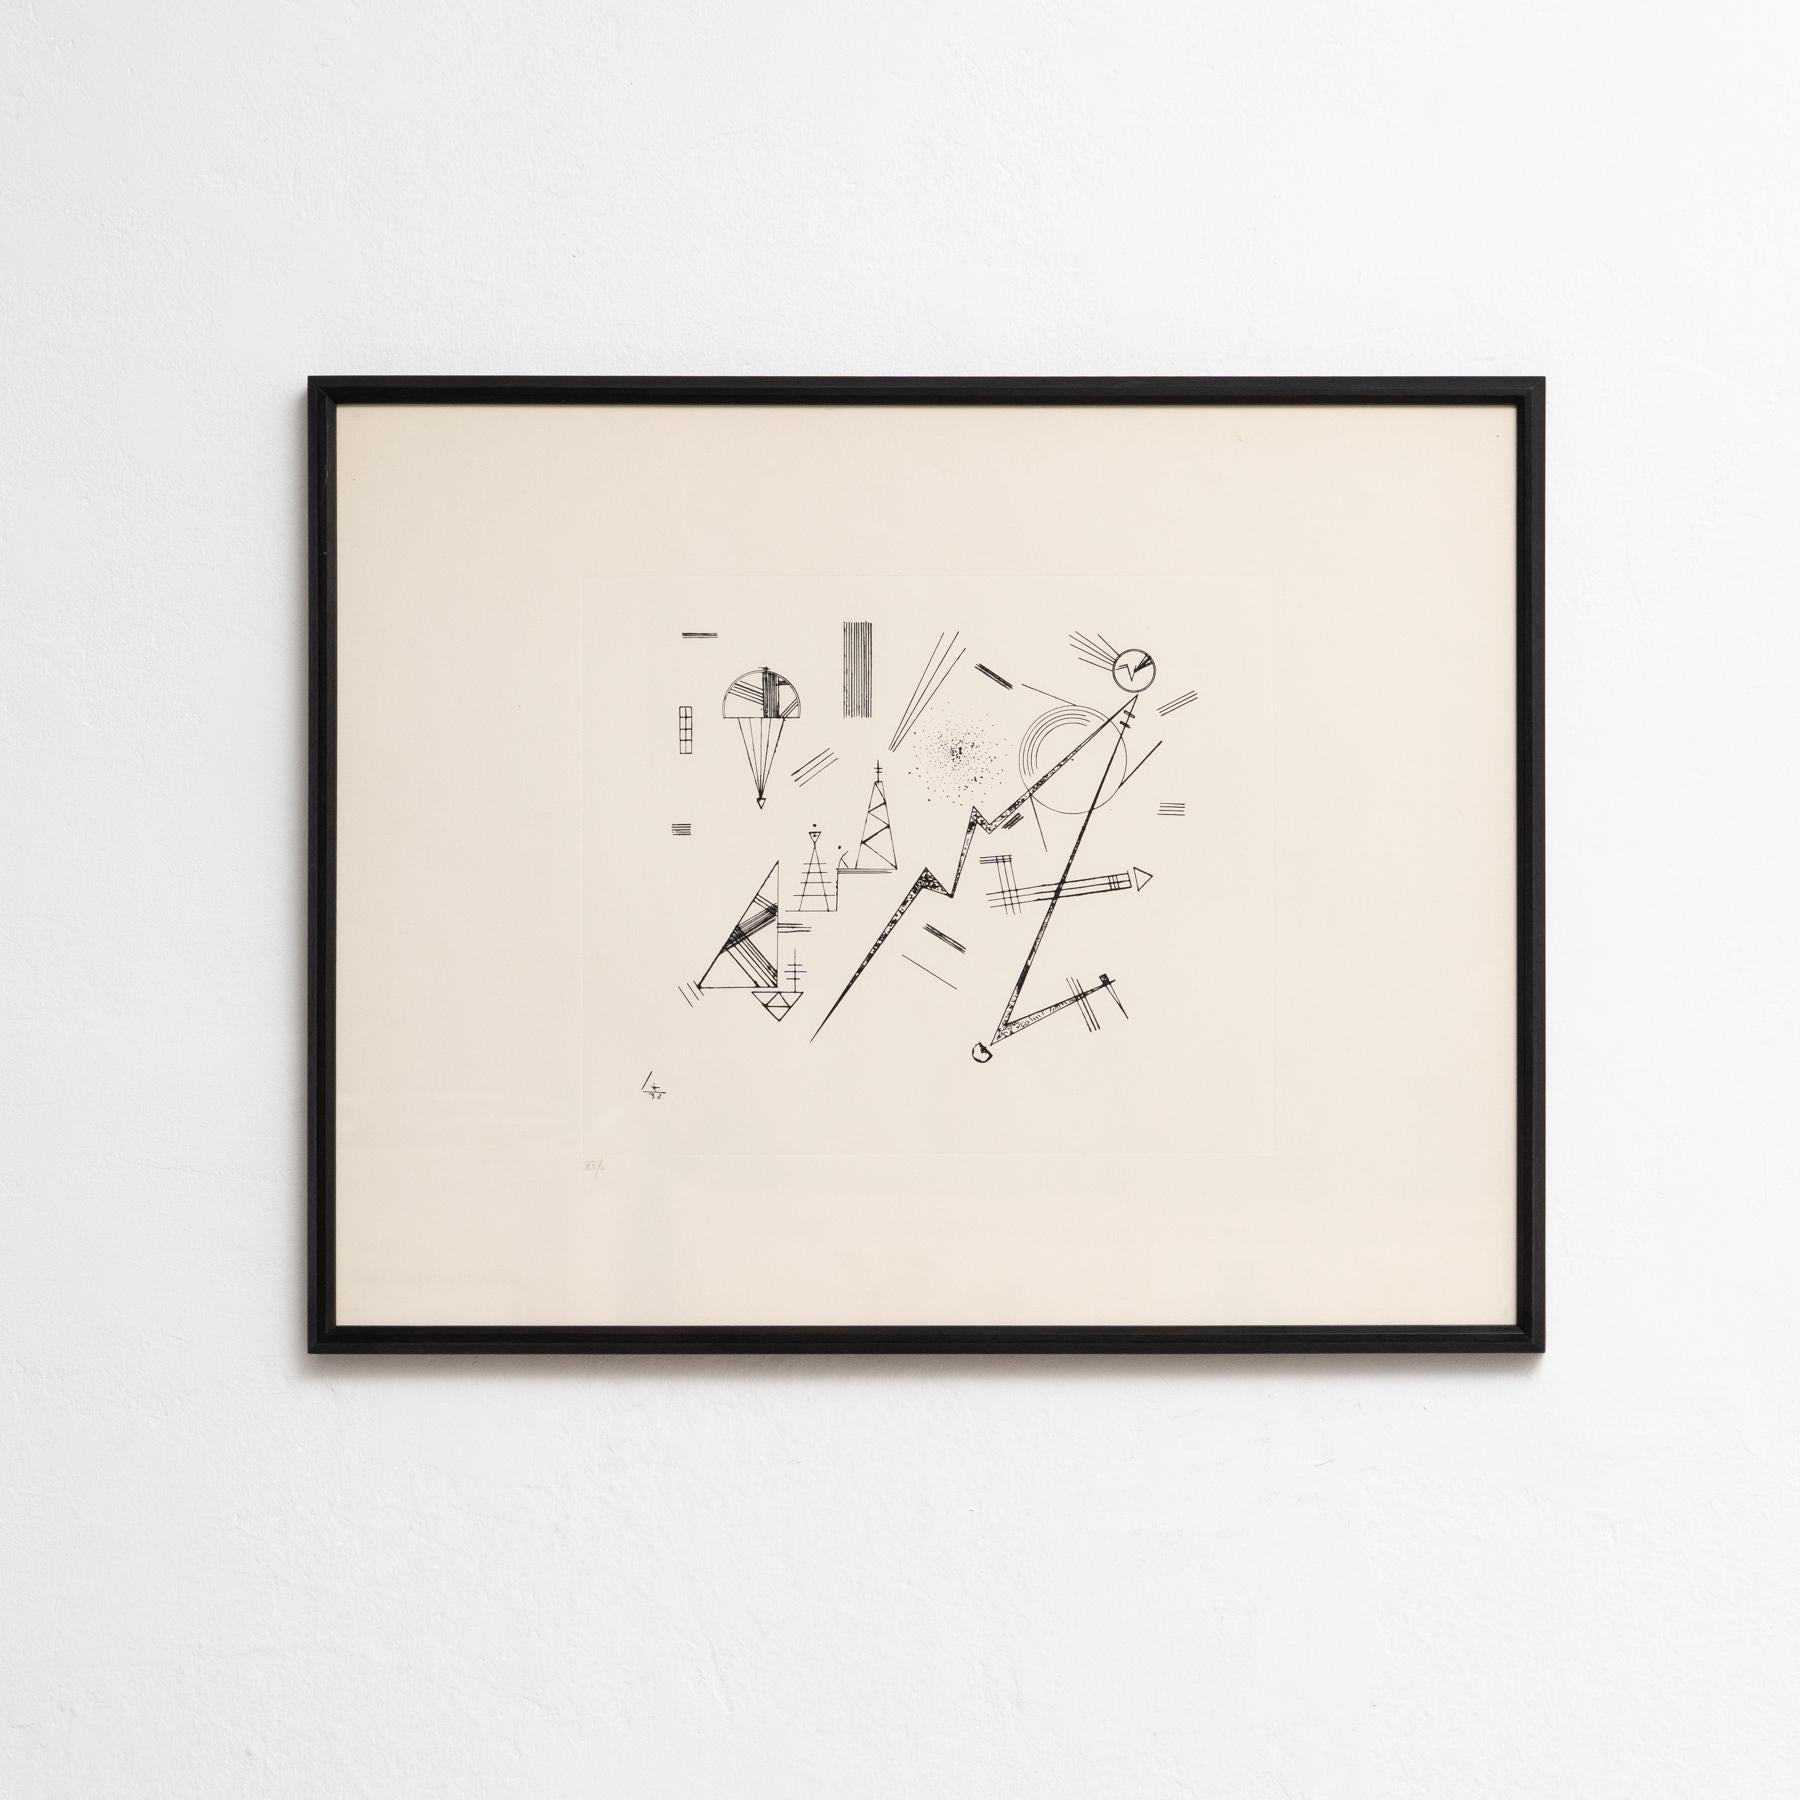 Wasily Kandinsky framed abstract etching.

Made by the artist, circa 1960

Framed in Barcelona by a local artisan in natural fine wood.

In original condition, with minor wear consistent with age and use, preserving a beautiful patina.

Signed on